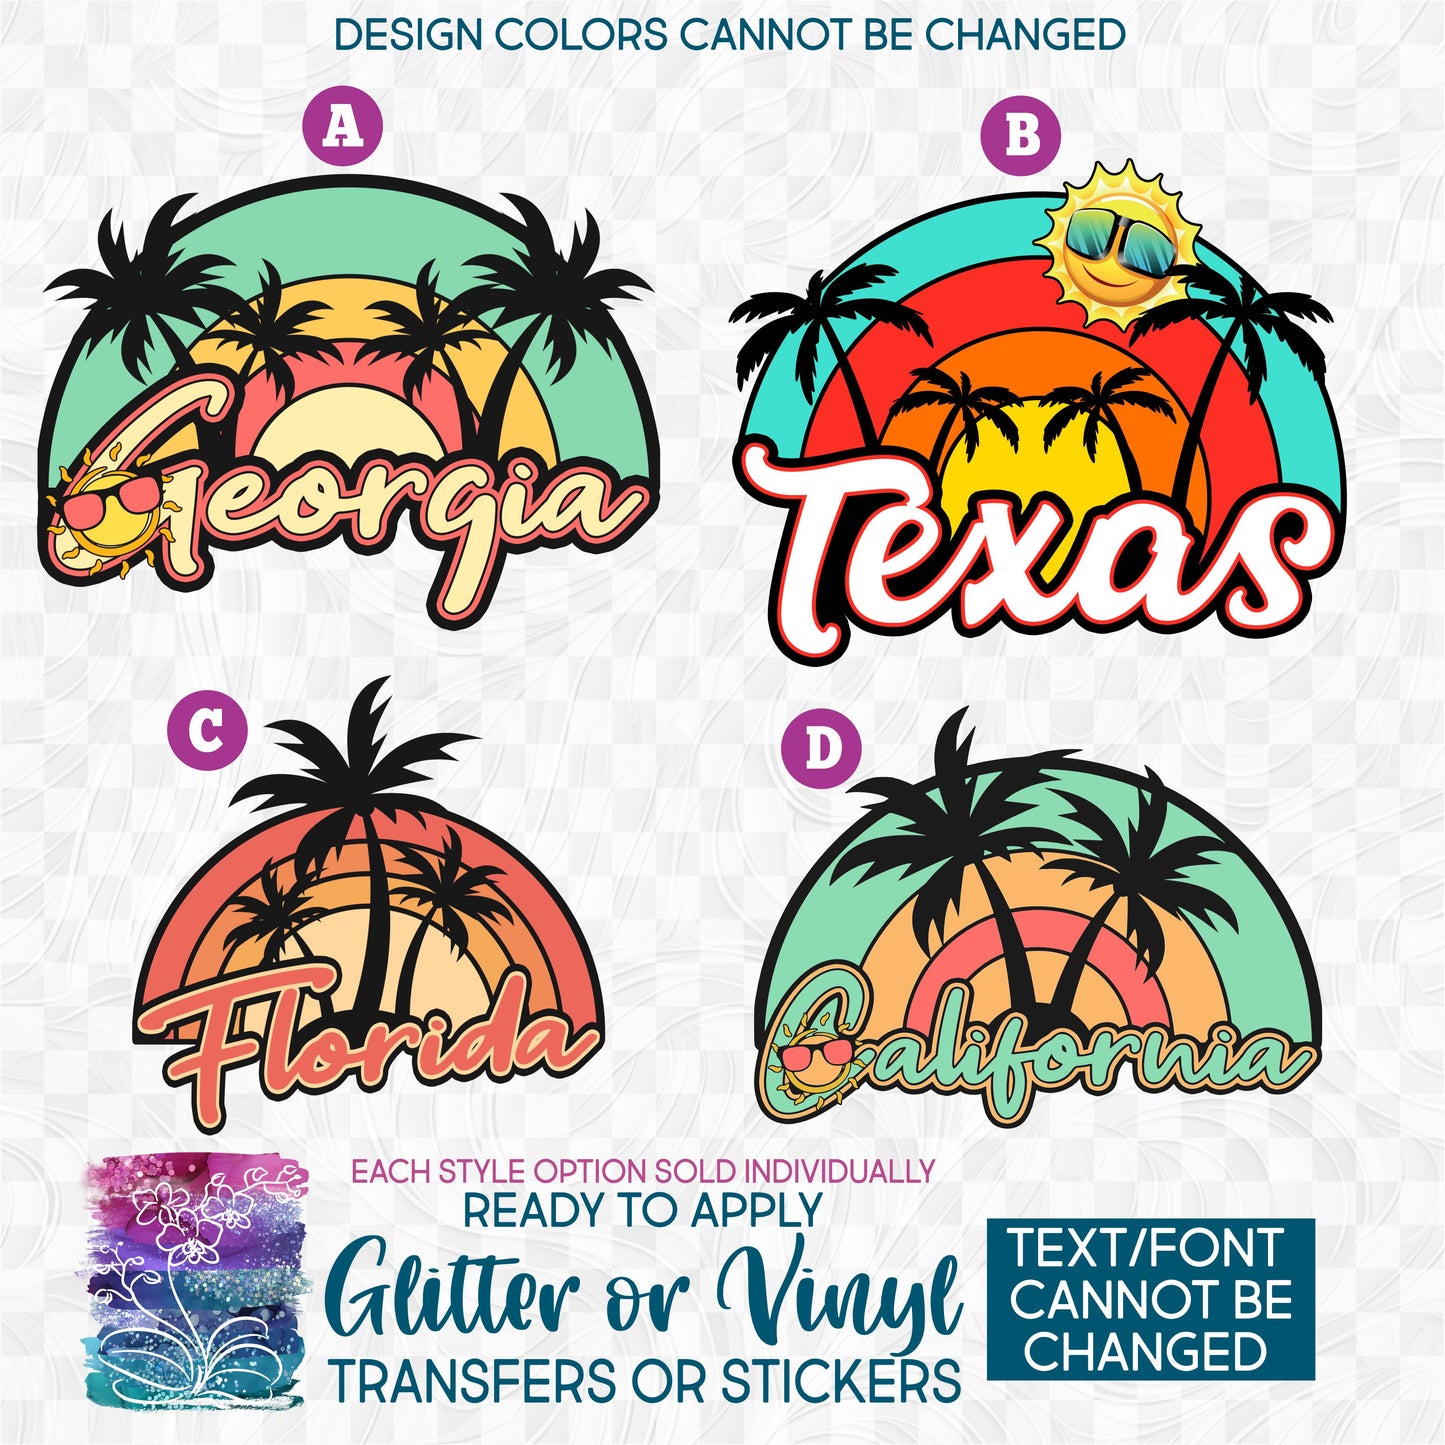 SBS-117-A6 Sunset Beach Tropical Palm Trees Georgia Texas Florida Made-to-Order Iron-On Transfer or Sticker